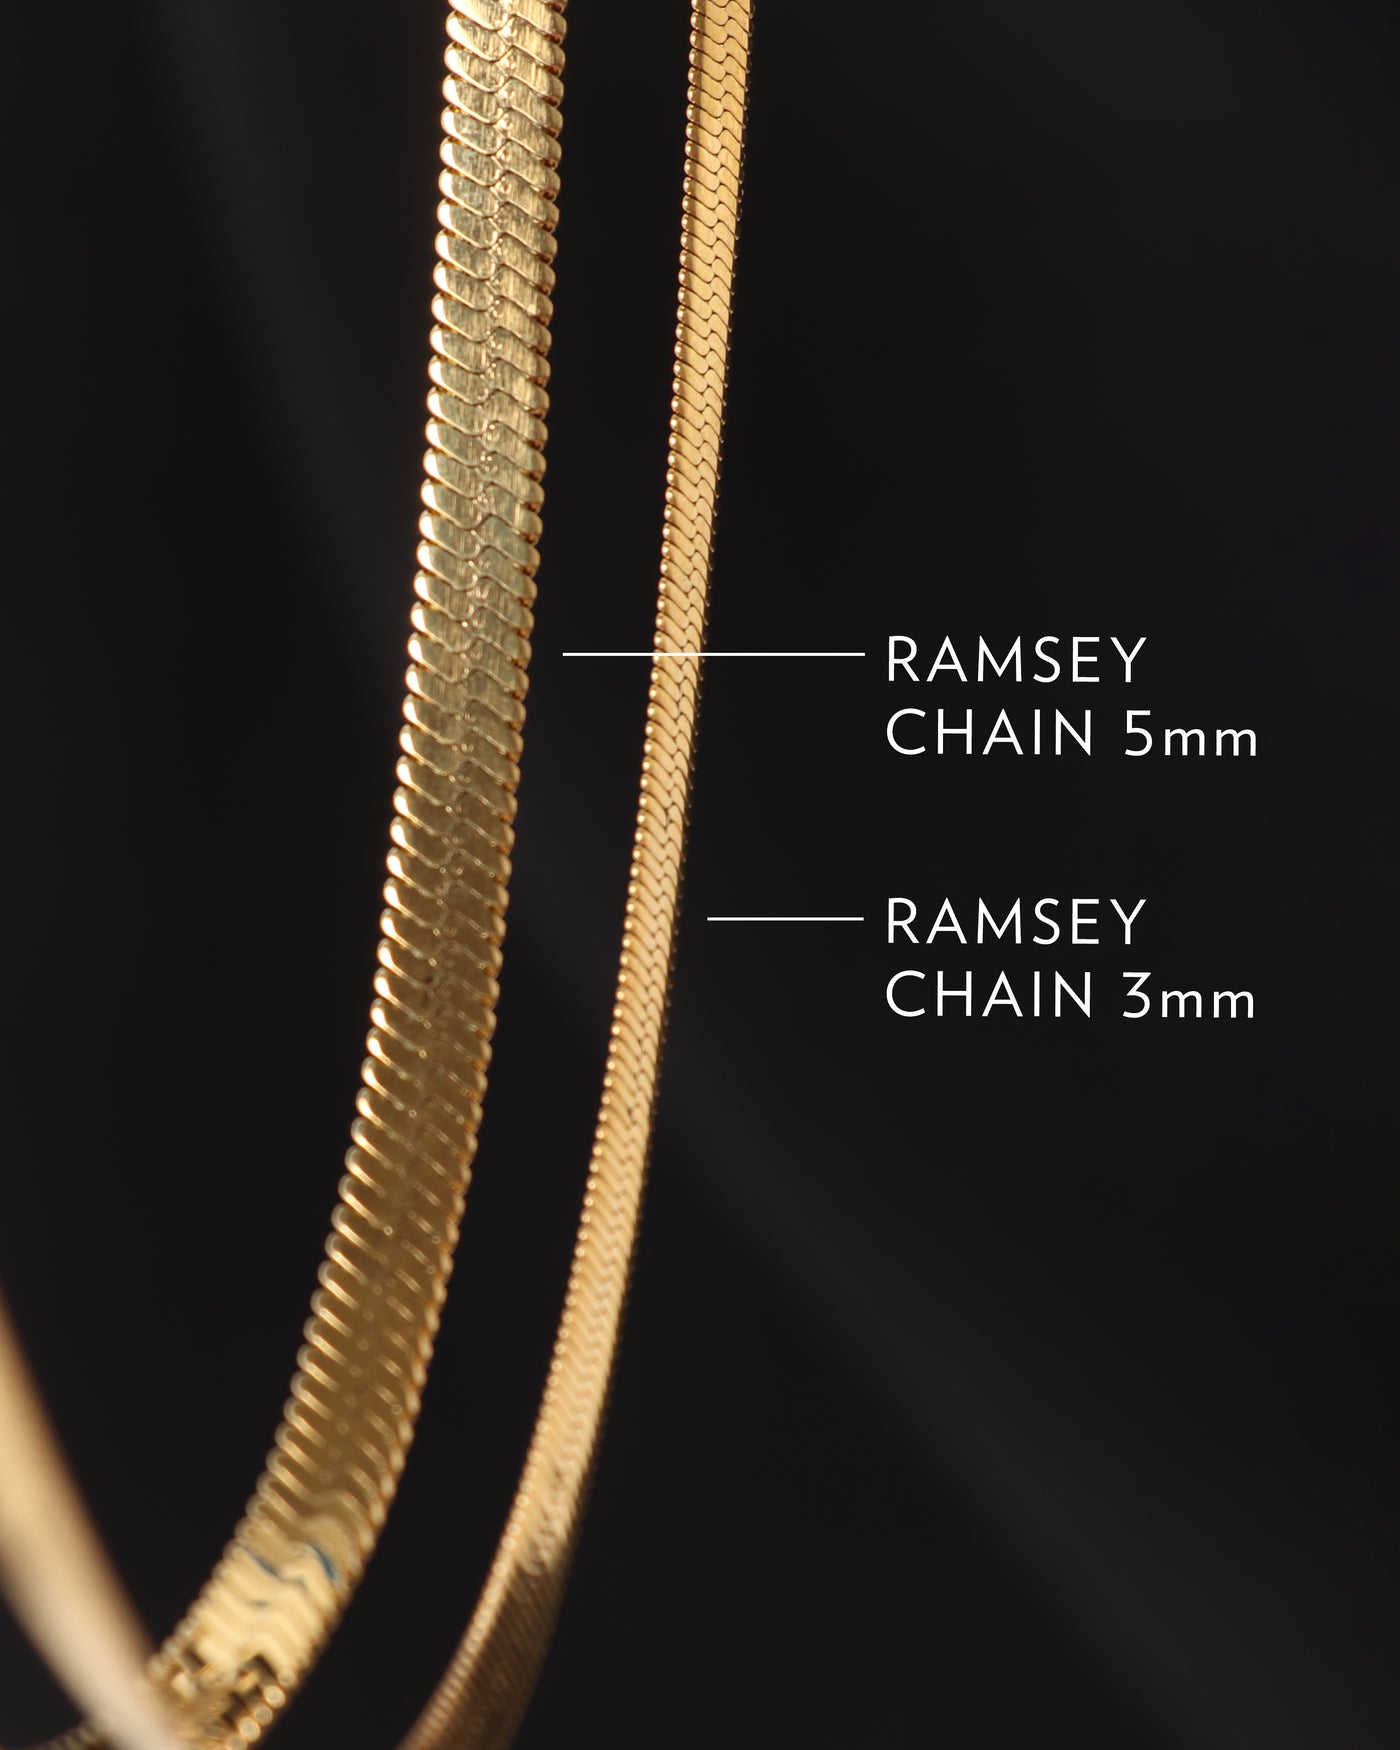 RAMSEY ANKLET 3mm